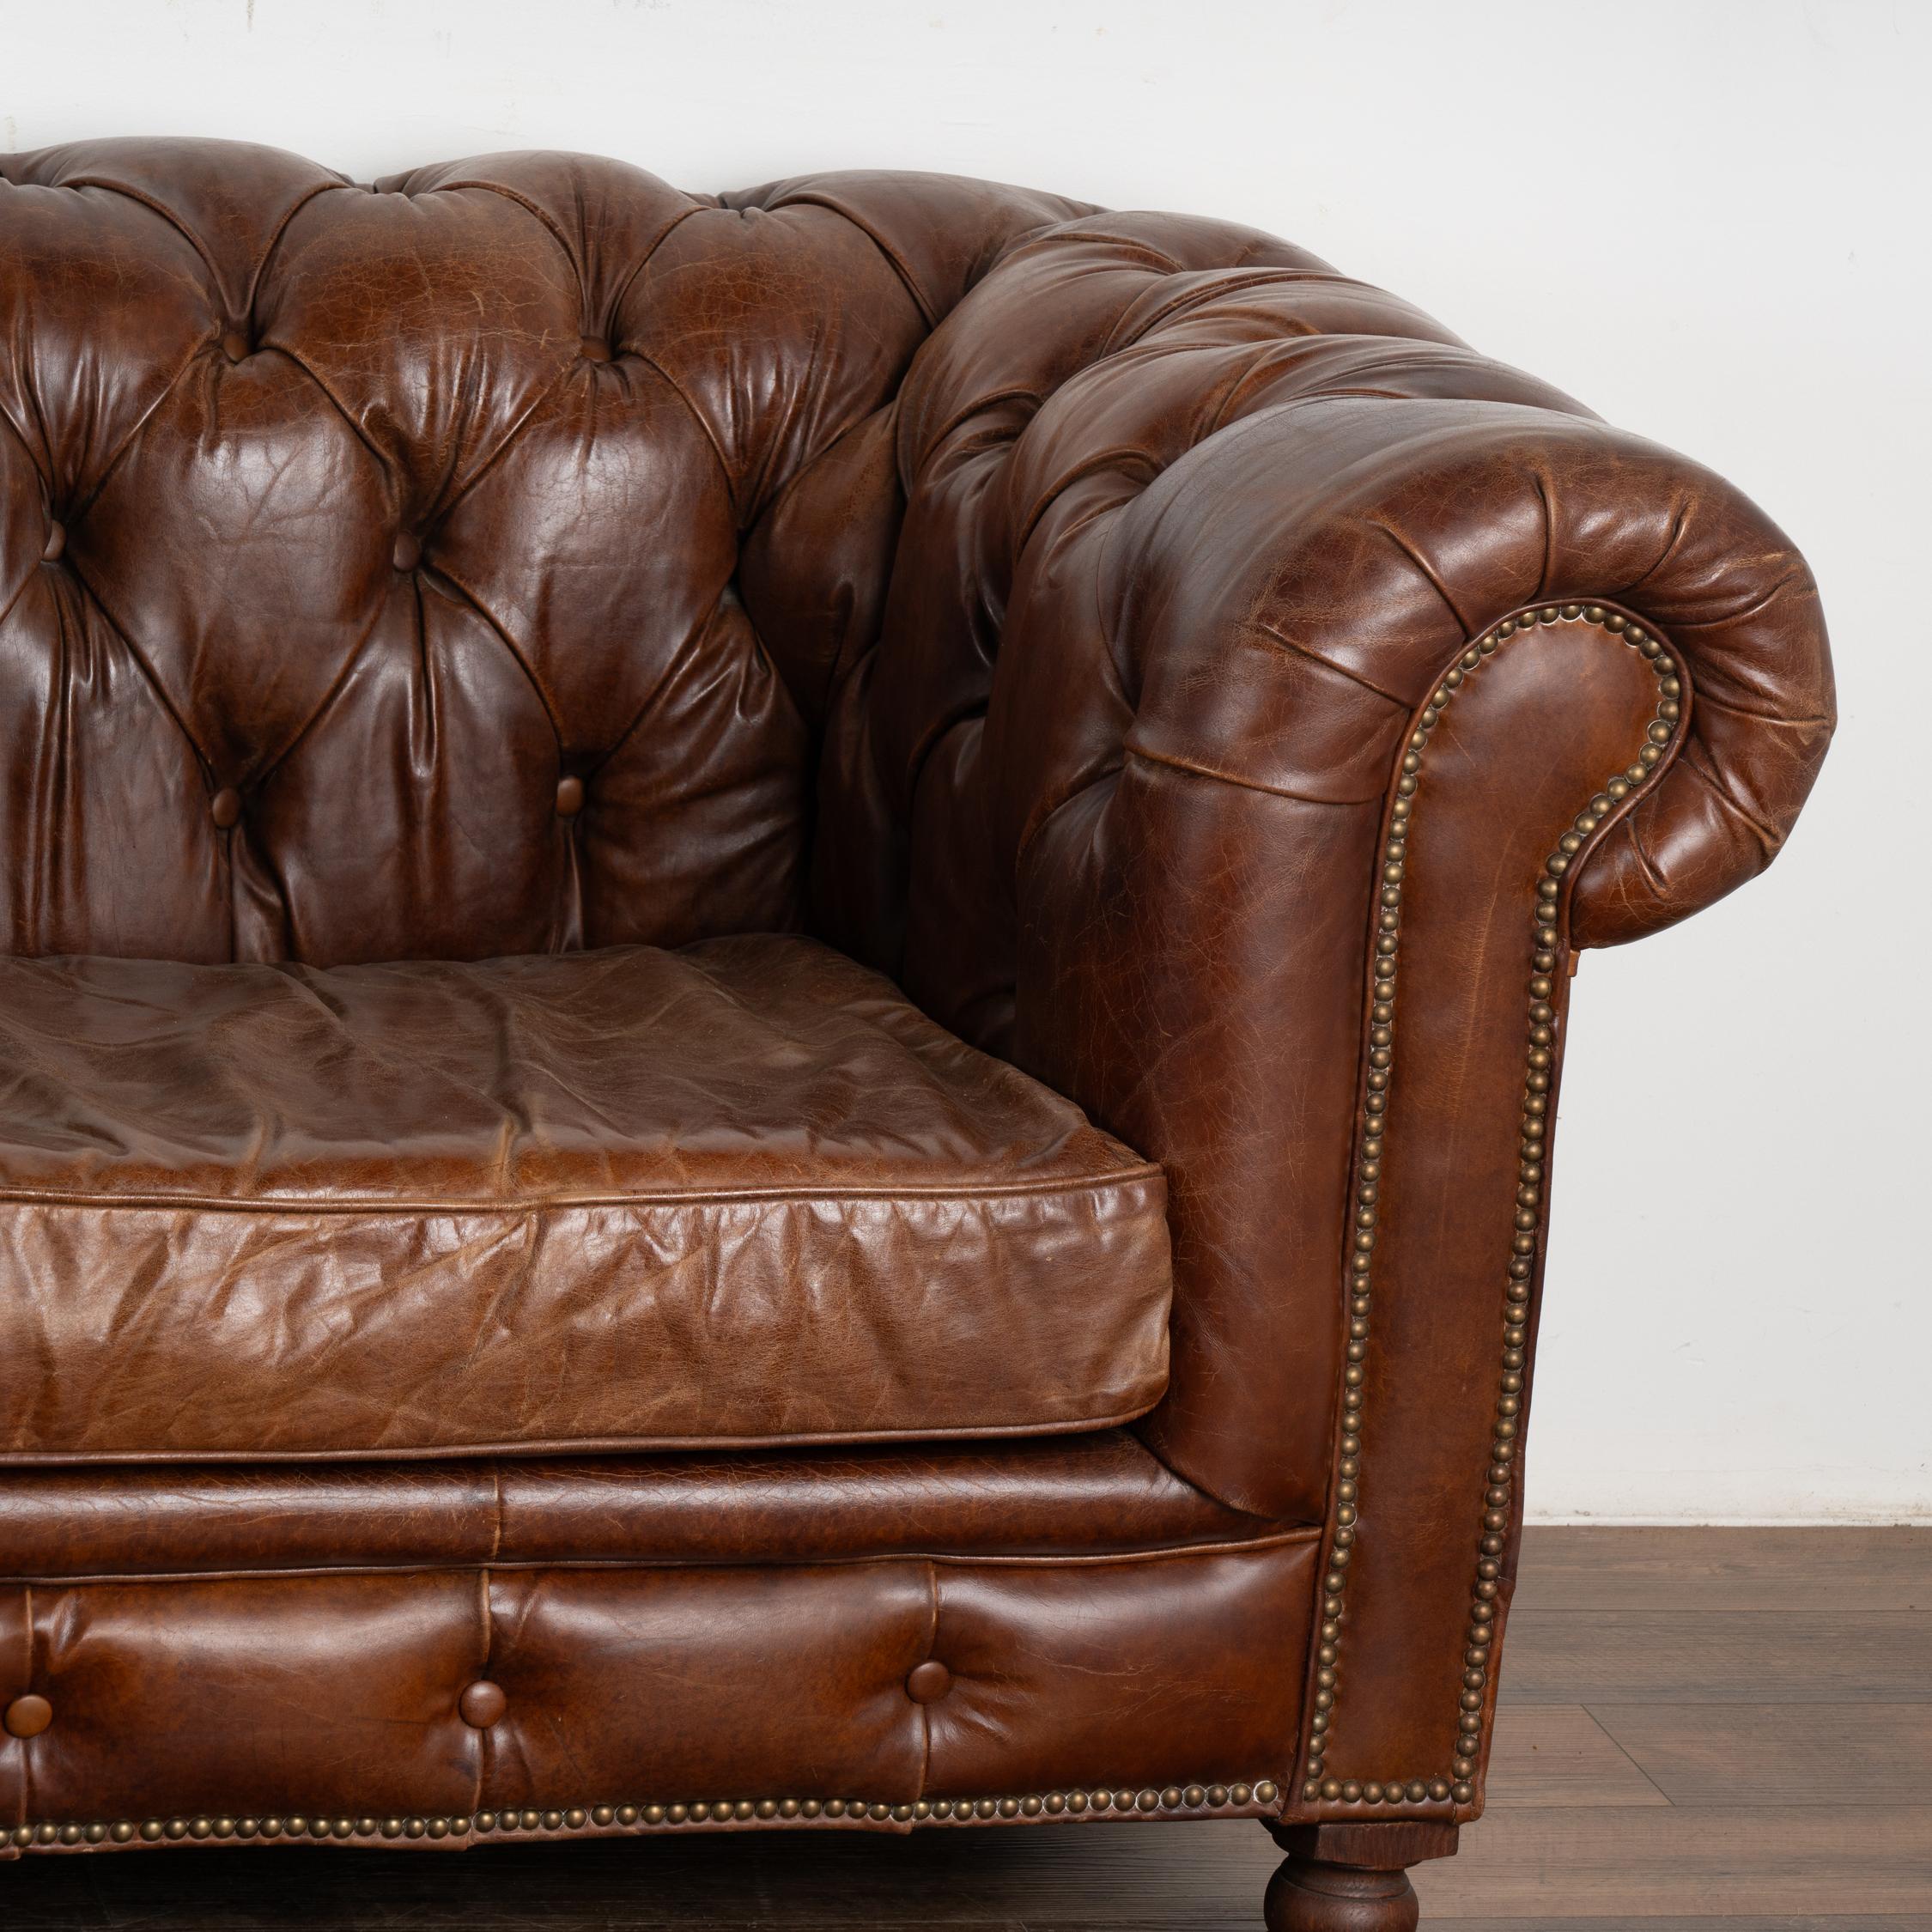 20th Century Pair, Vintage Brown Leather Chesterfield Club Arm Chairs, England circa 1970-80